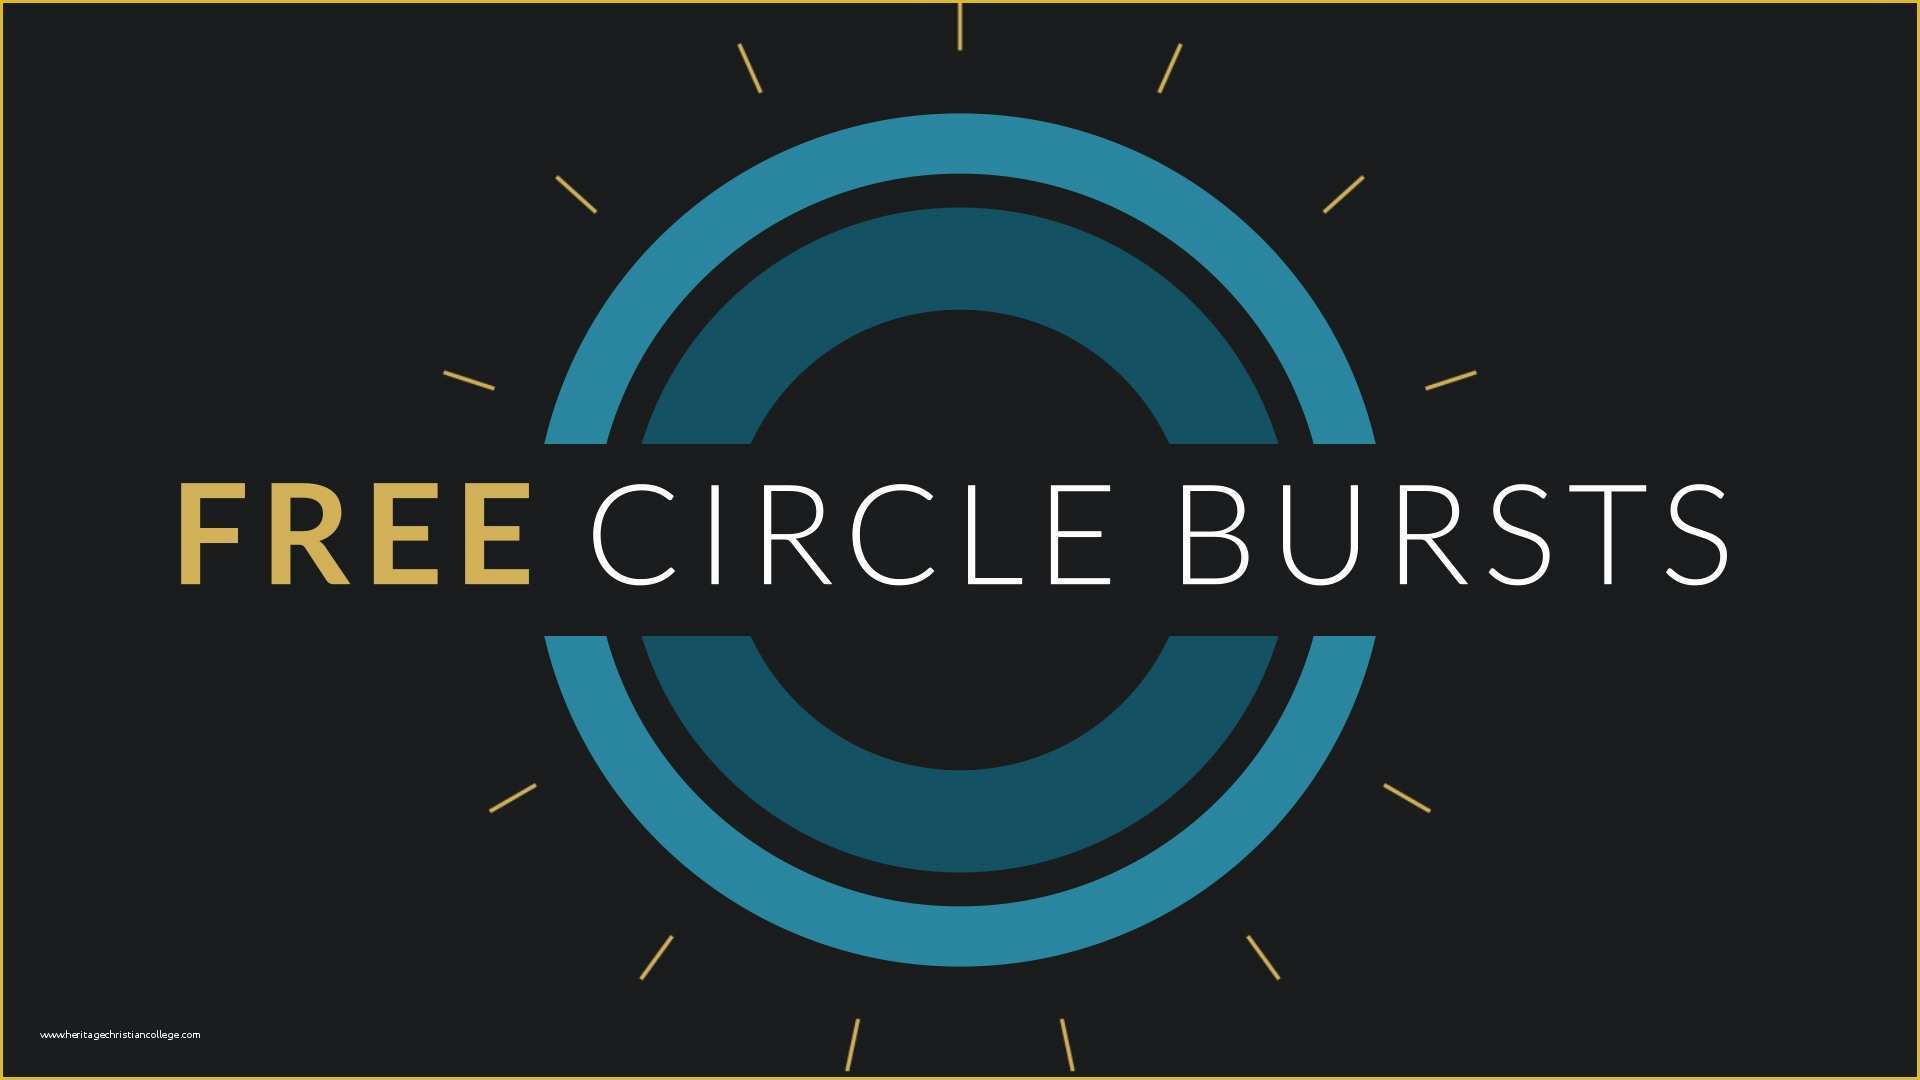 Free Motion Graphics Template Premiere Pro Of Free after Effects Template Circle Burst assets